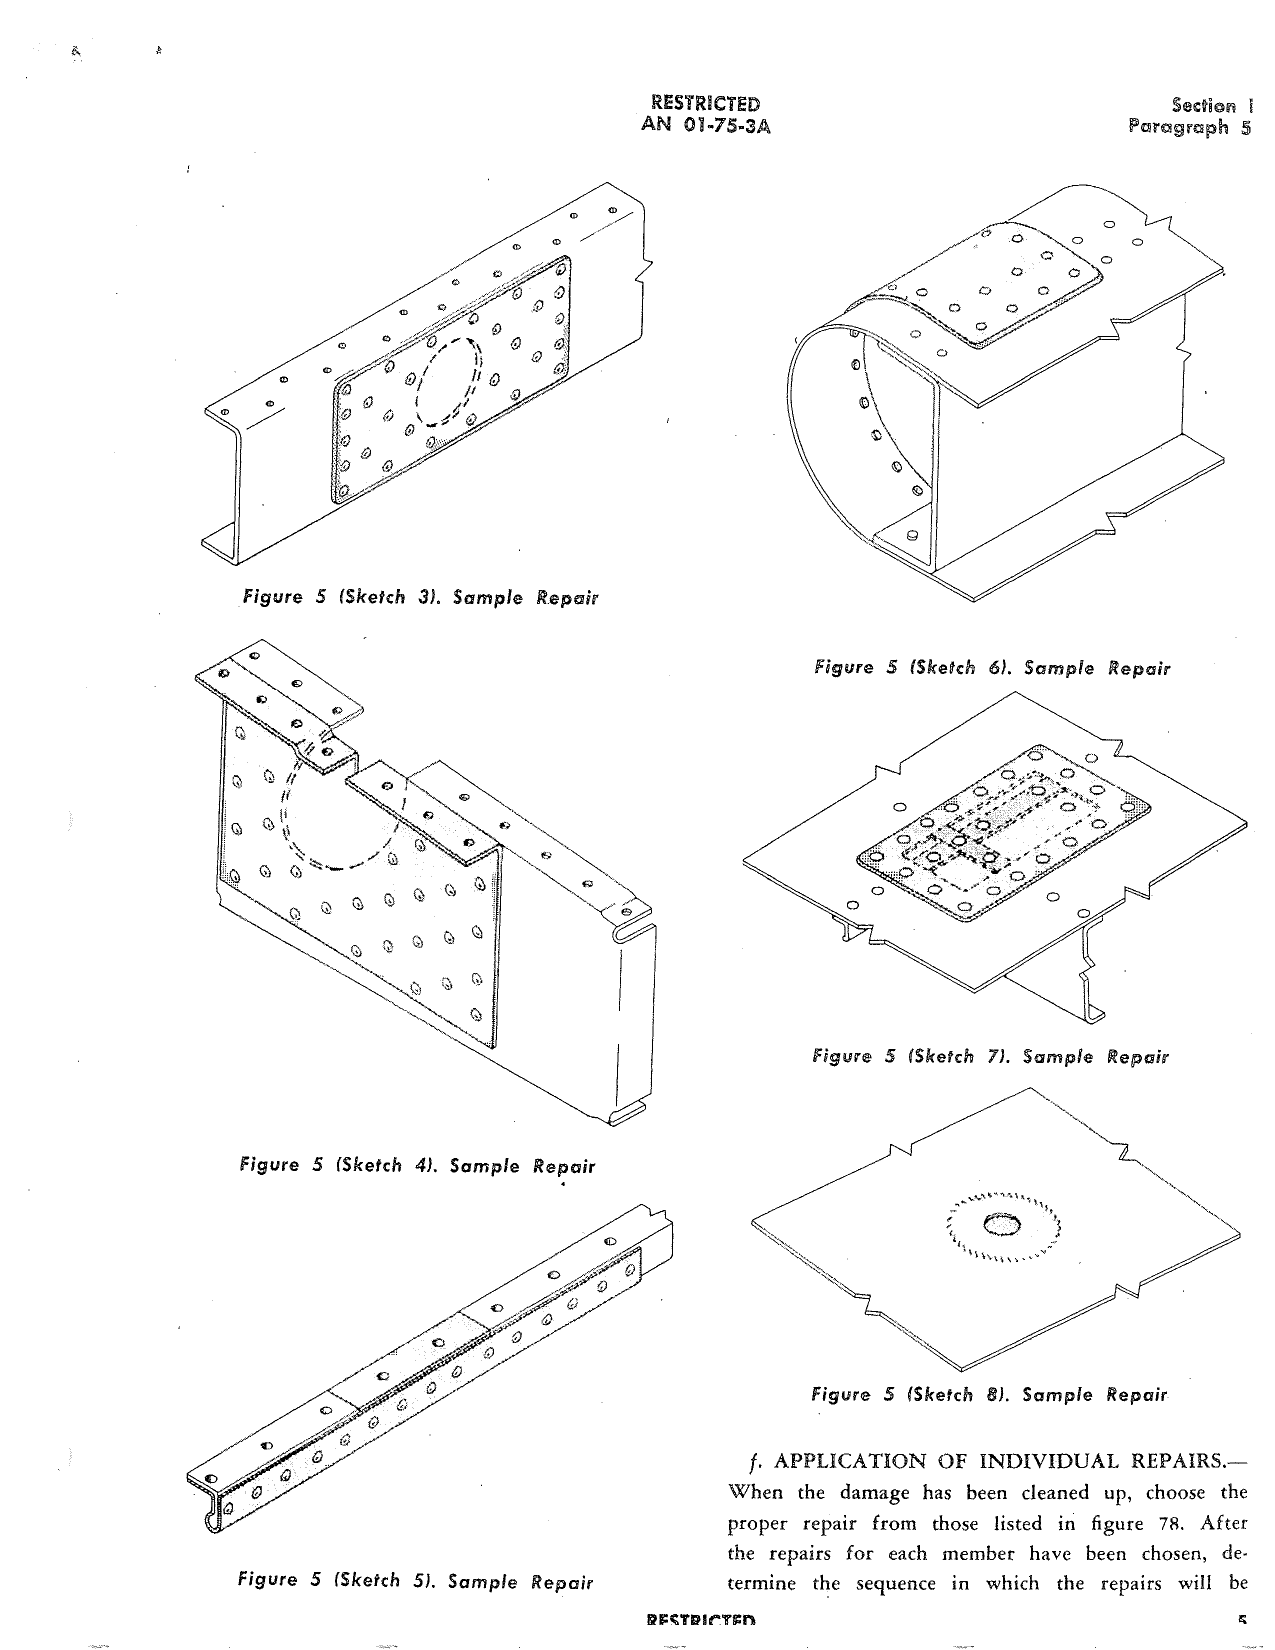 Sample page 11 from AirCorps Library document: Structural Repair Instructions - P-38